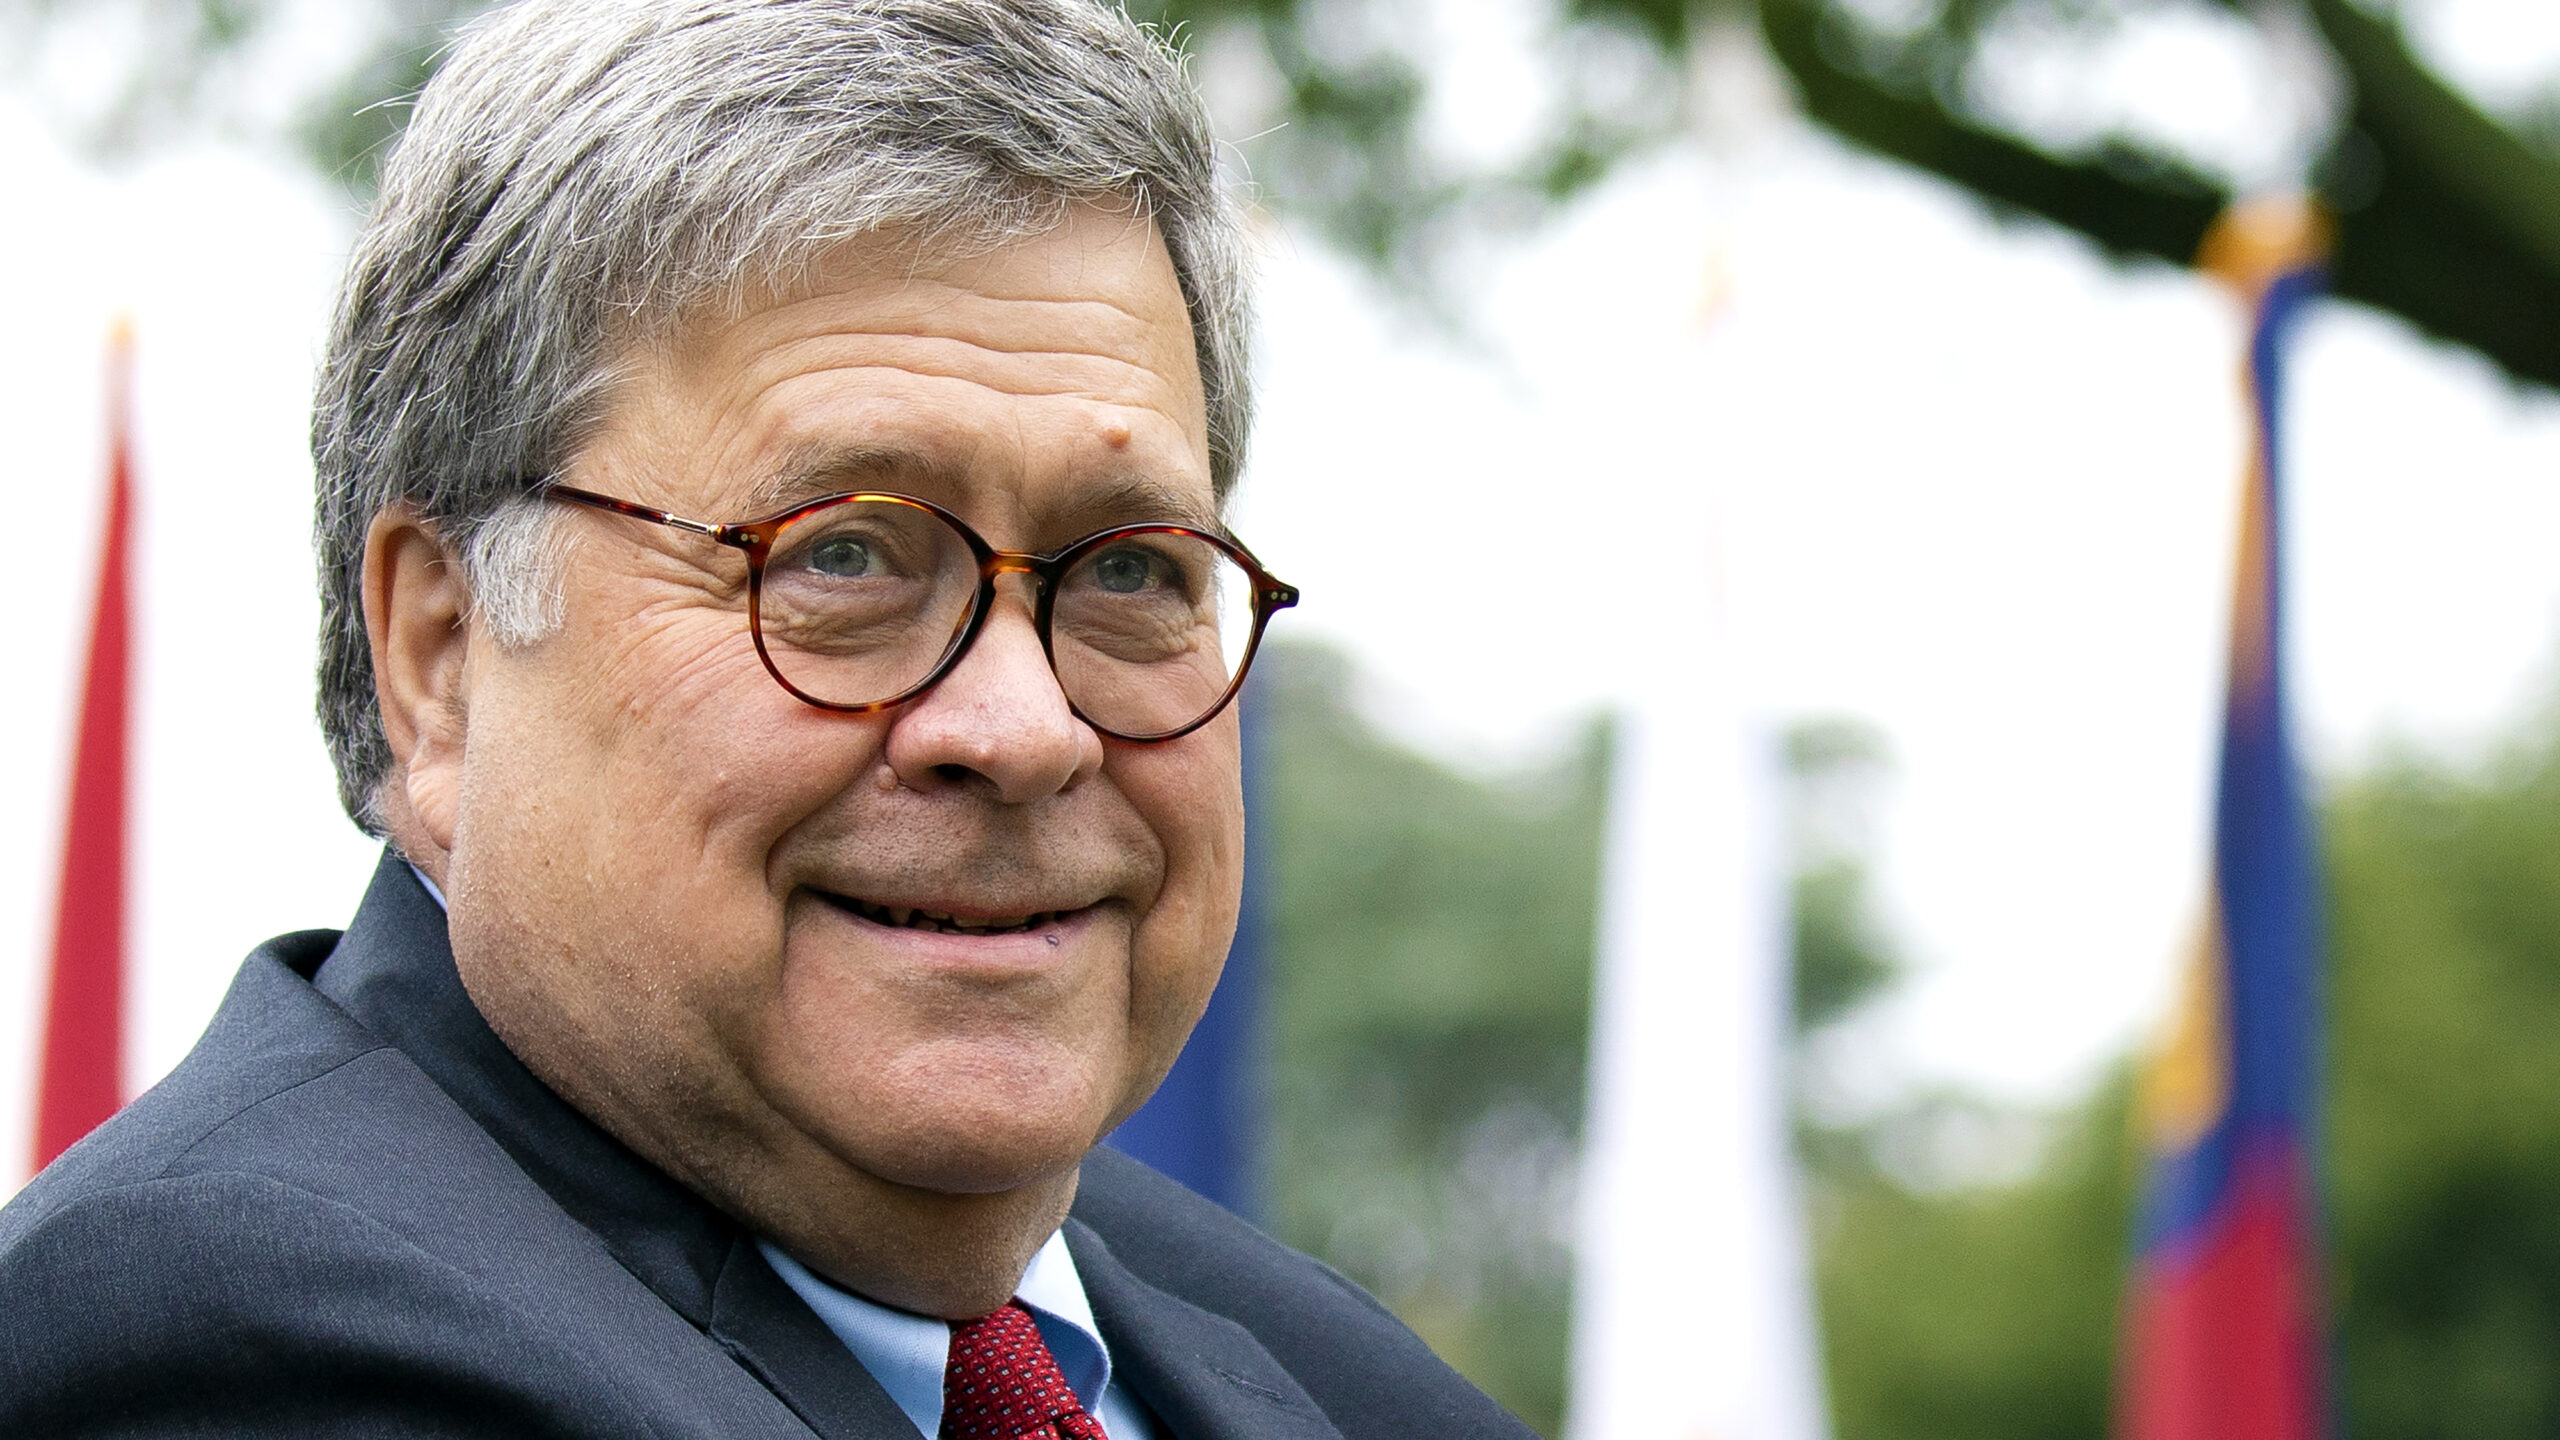 Former Attorney General Bill Barr Claps Back After Trump Calls Him A RINO